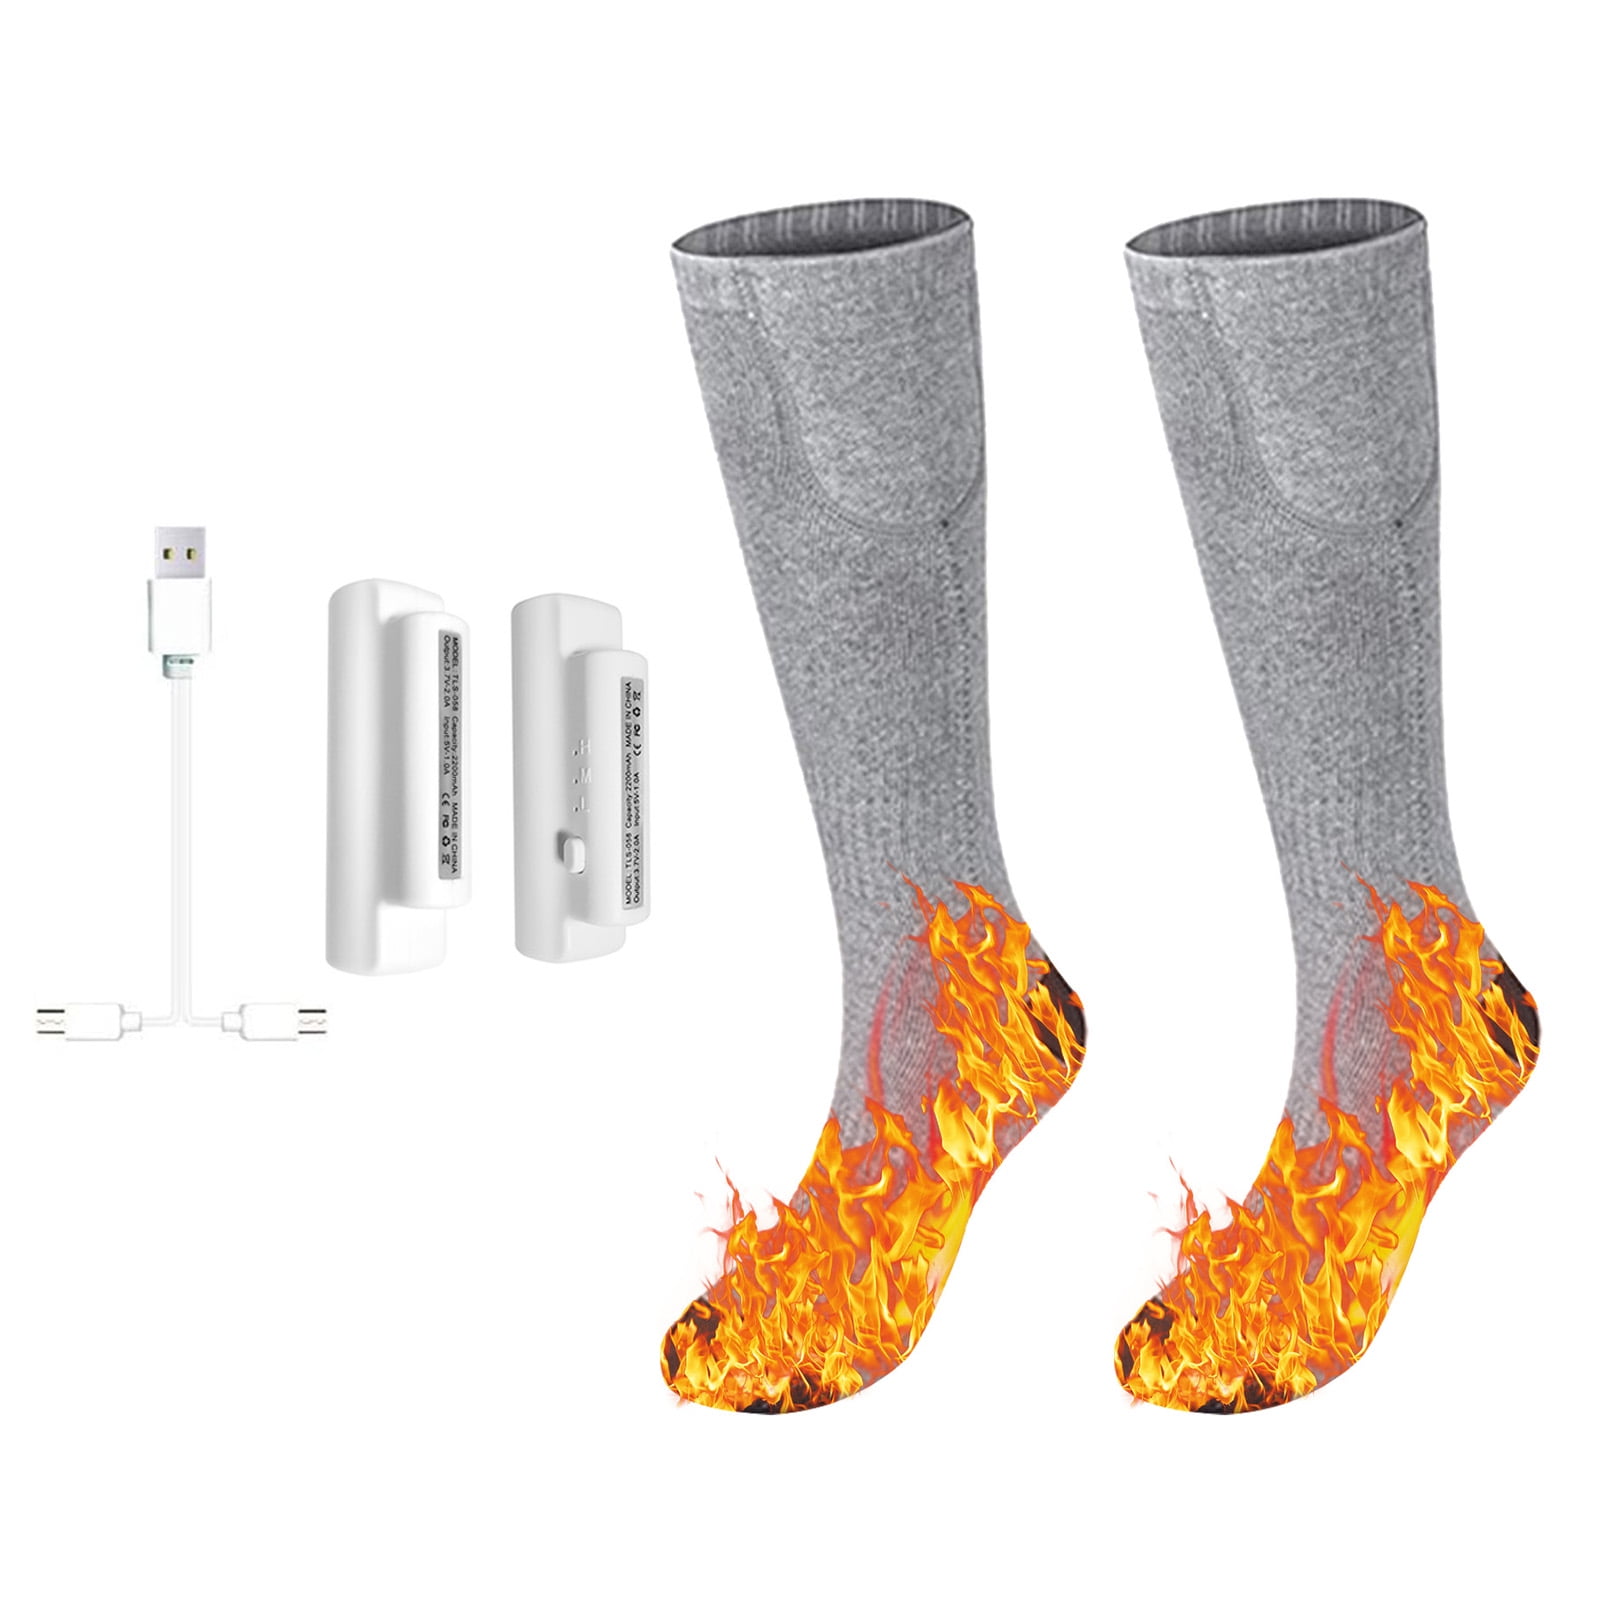 1 Pair Electric Heated Socks Foot Warm Skiing Rechargeable Battery 3.7V 2200mAh 